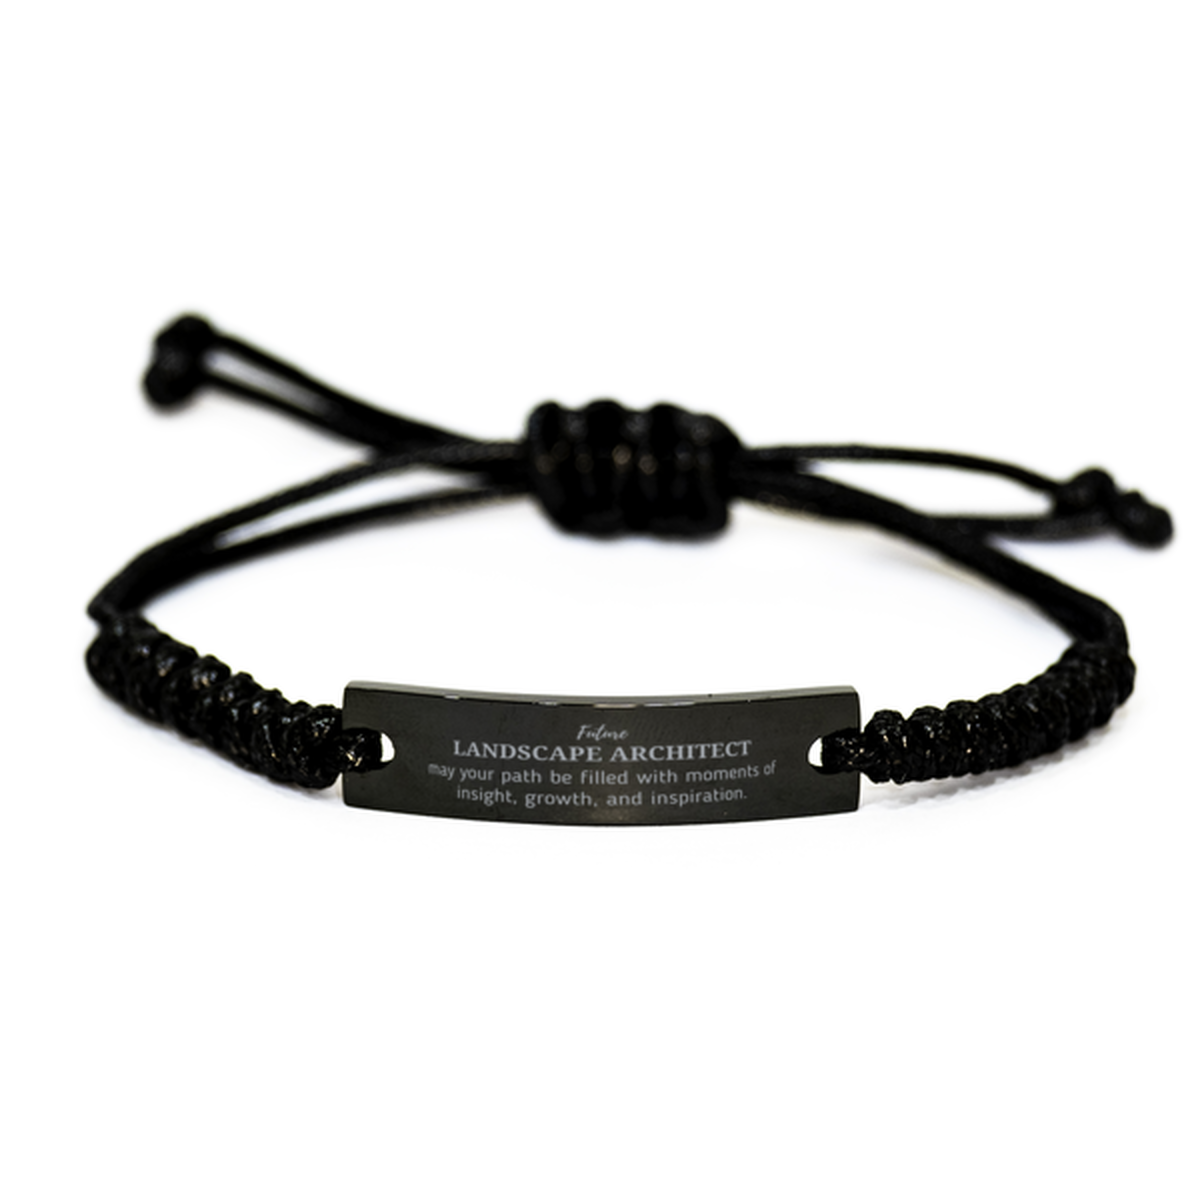 Future Landscape Architect Gifts, May your path be filled with moments of insight, Graduation Gifts for New Landscape Architect, Christmas Unique Black Rope Bracelet For Men, Women, Friends